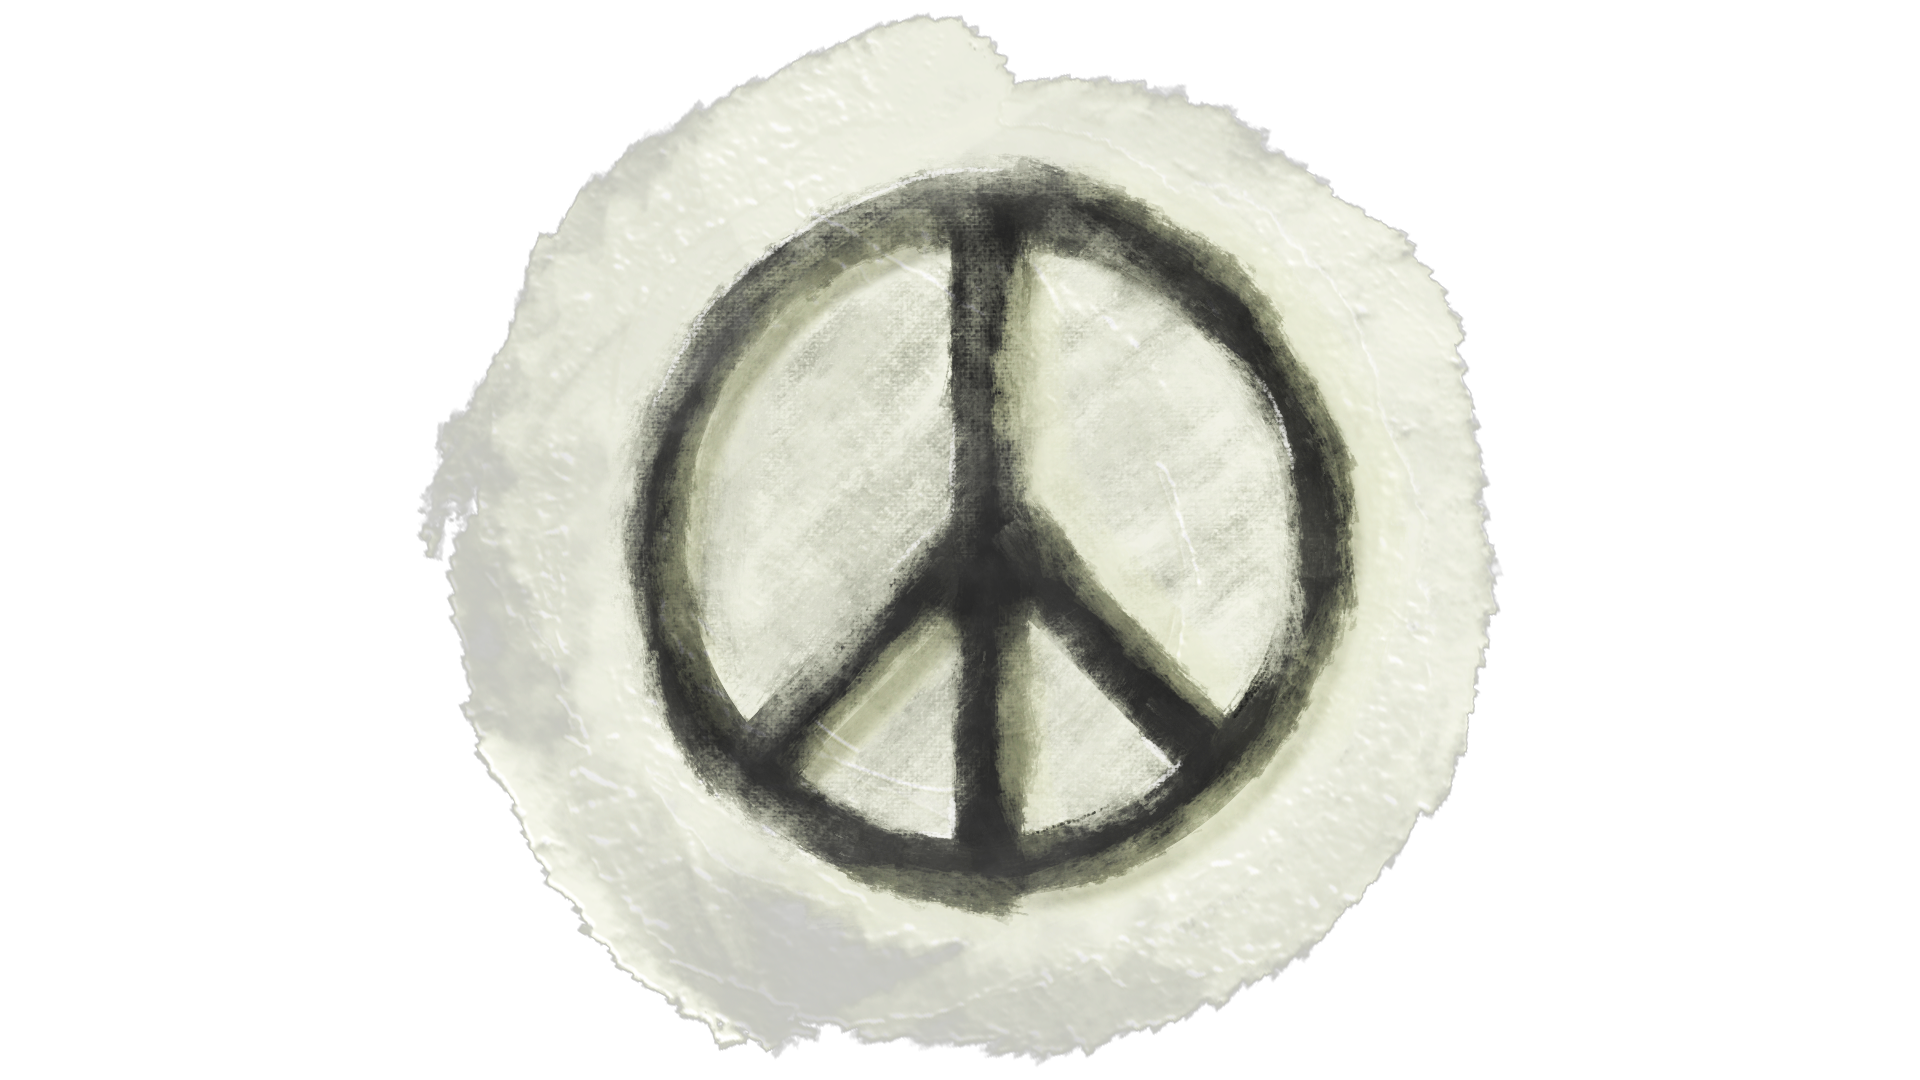 Icon for Peace